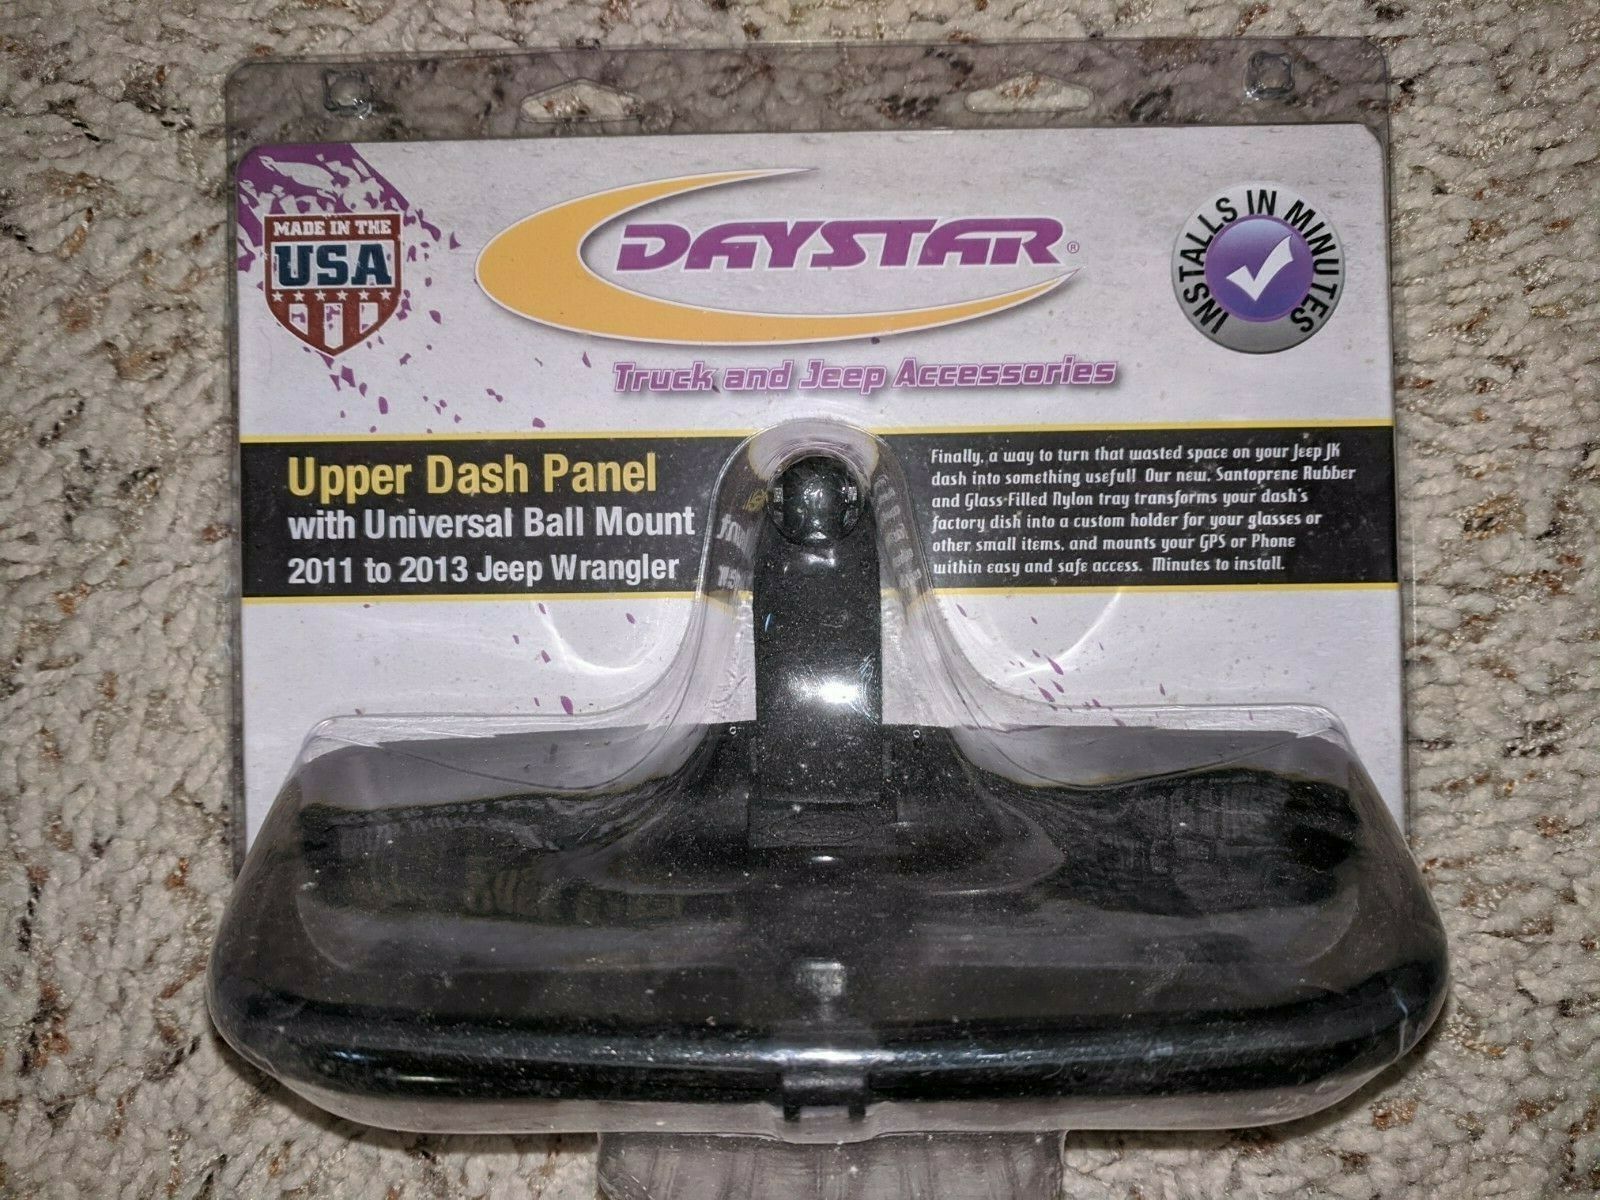 Daystar Upper Dash Panel with Universal Ball Mount for Jeep Wrangler 2011 and Up - $9.50